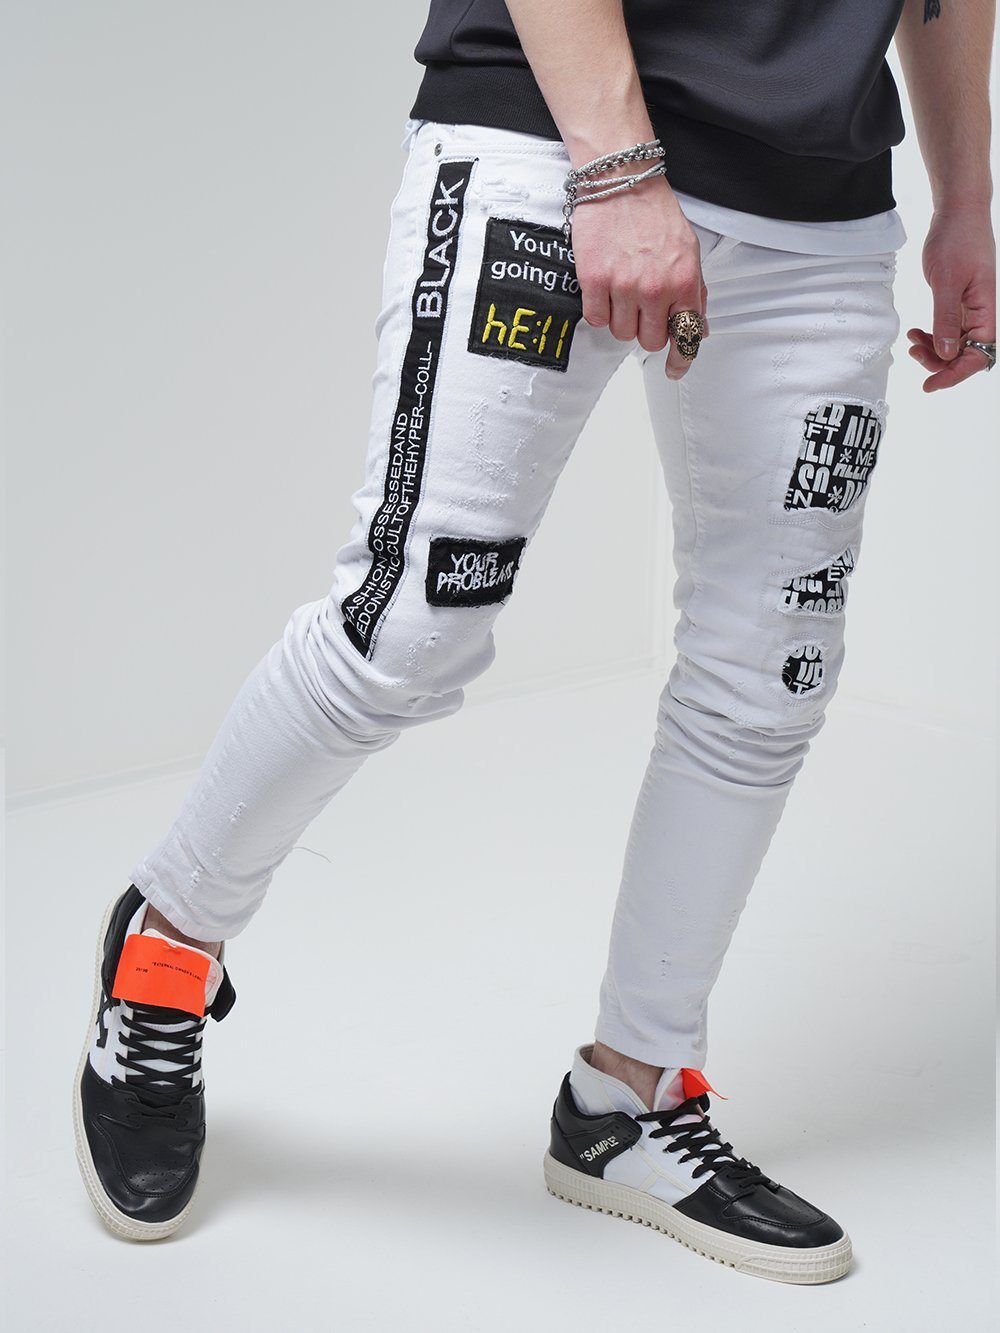 A man wearing the WHITE FALCON jeans with patches on them.